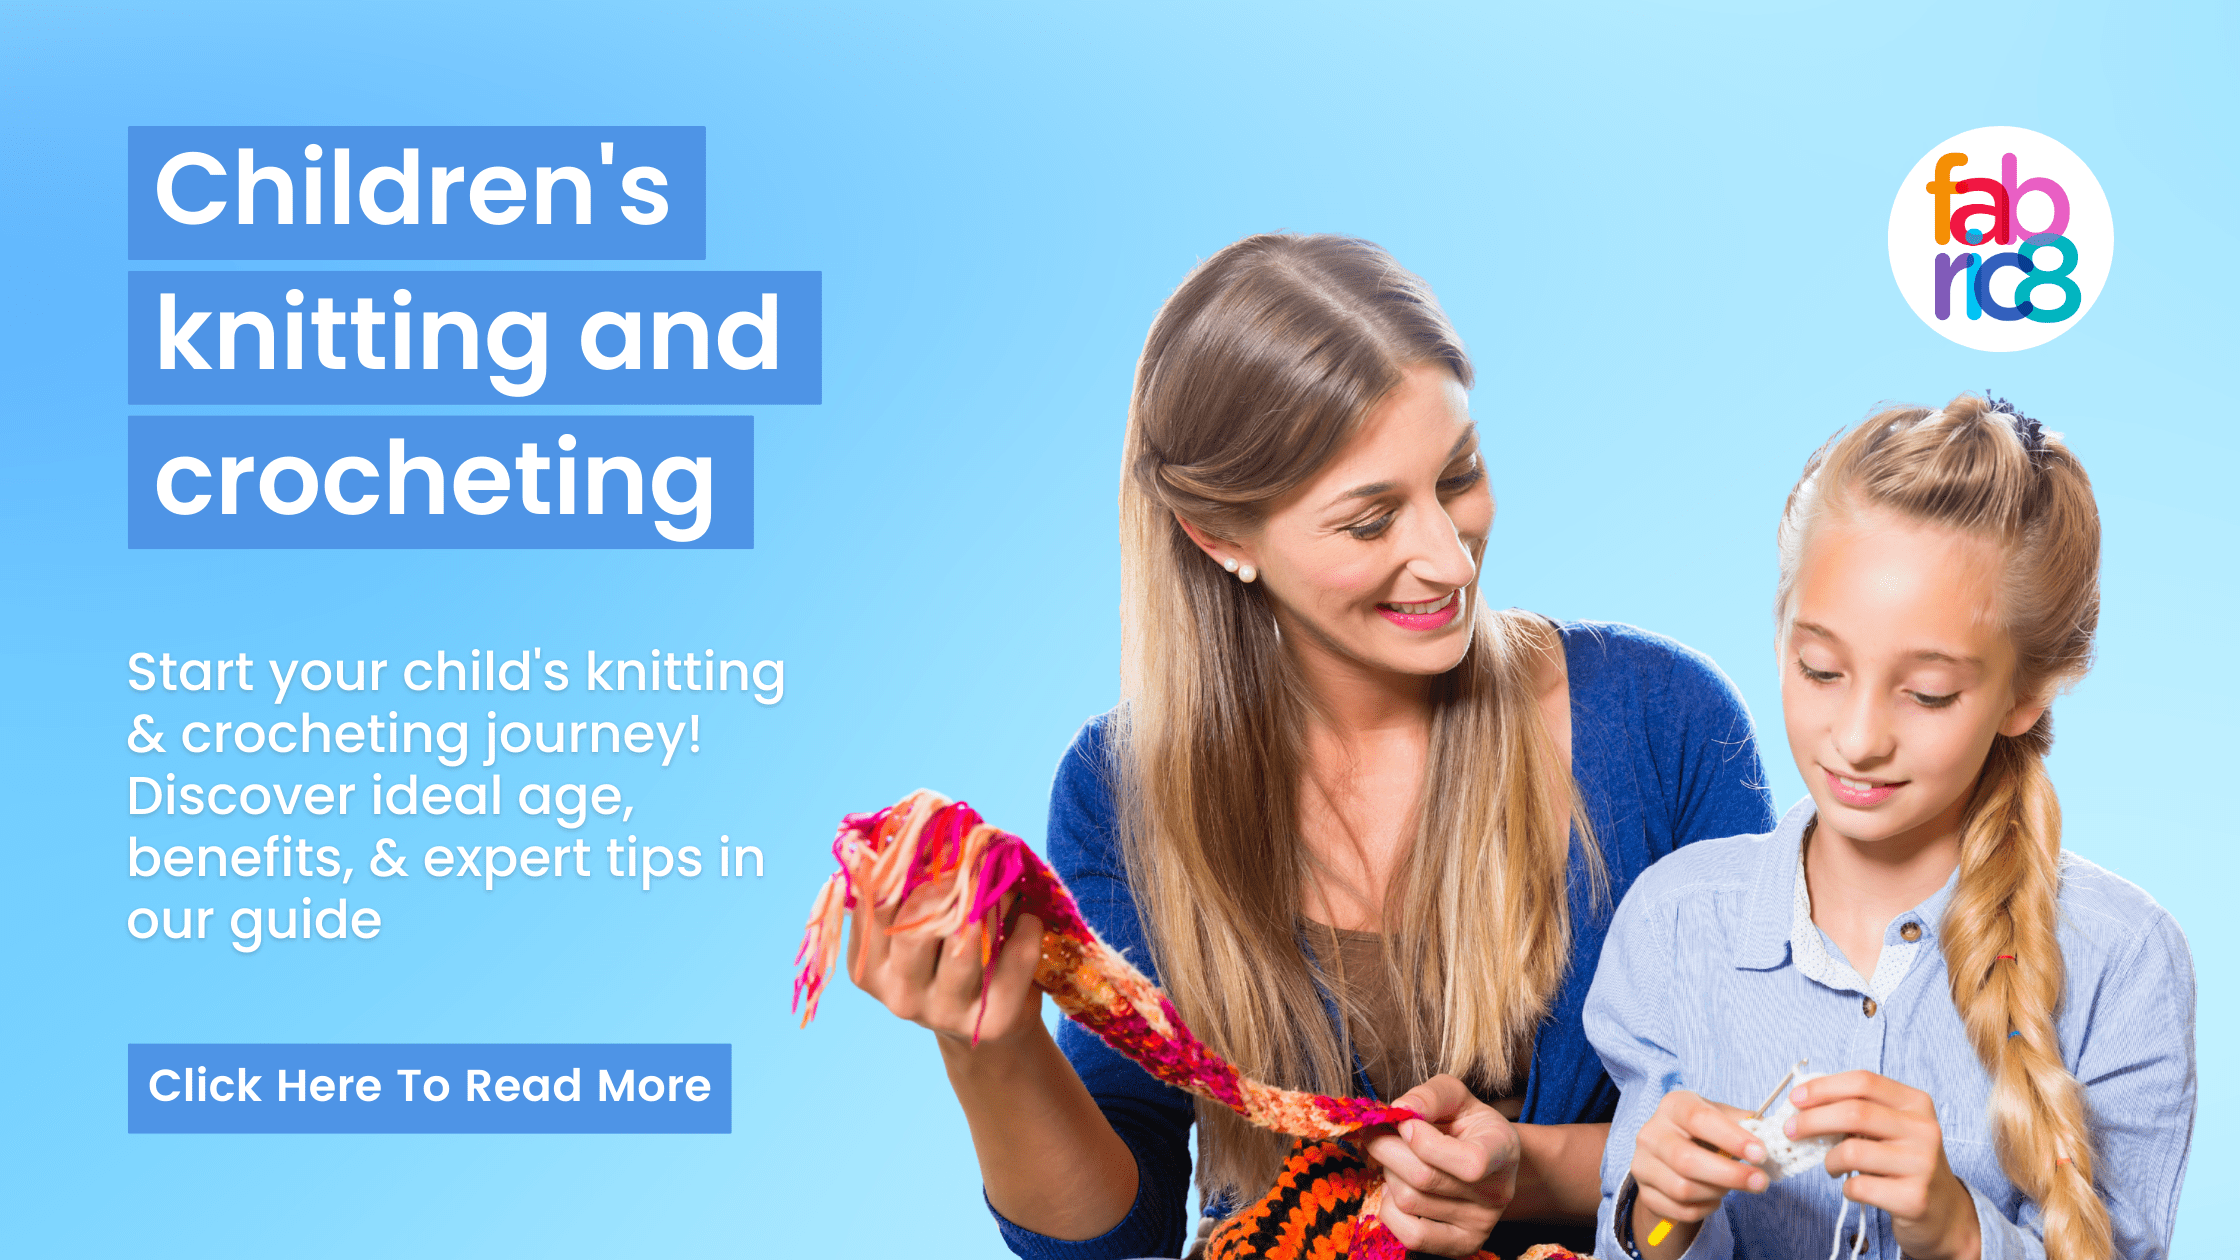 blue background with a mother and daughter smiling while learning how to knit. The mother is holding a long piece of red knitted material.